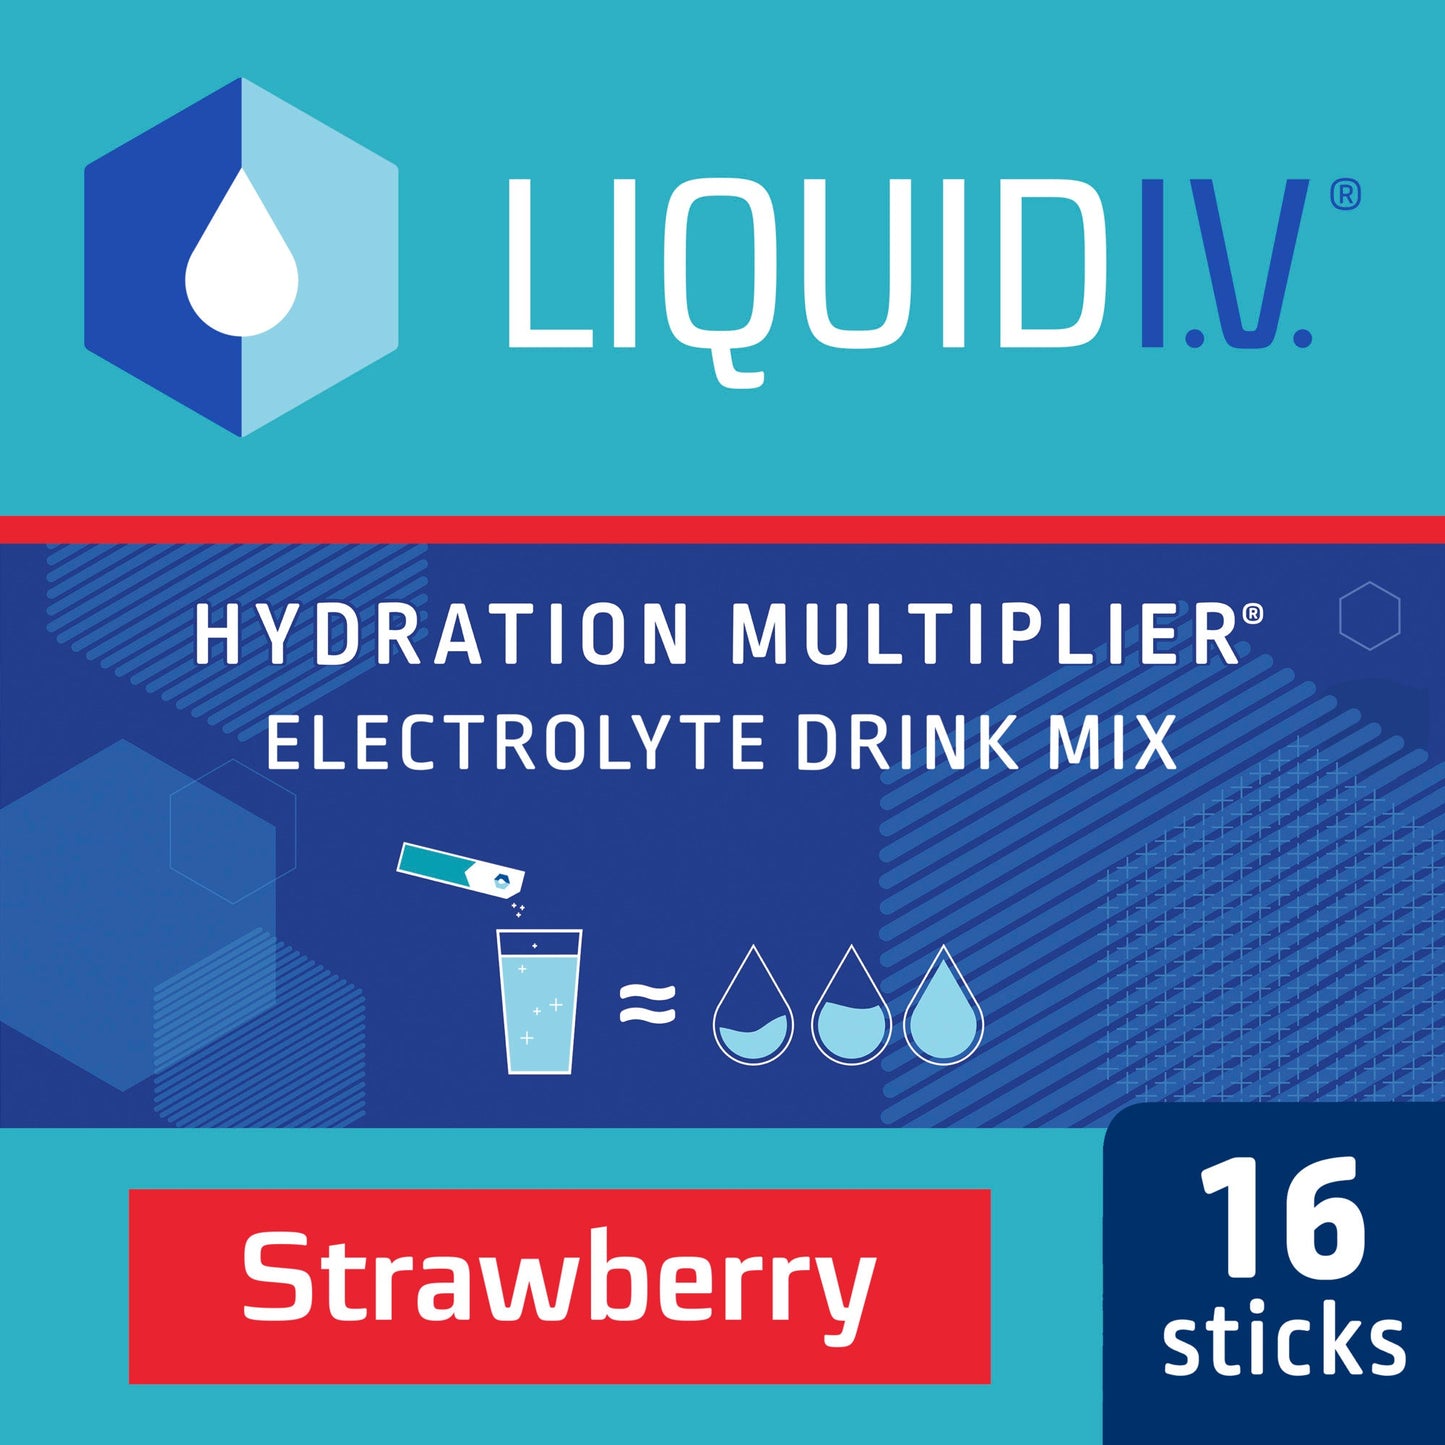 Showing the mobile-ready front angle view of the green & blue Liquid I.V. Hydration Multiplier Strawberry product packaging.